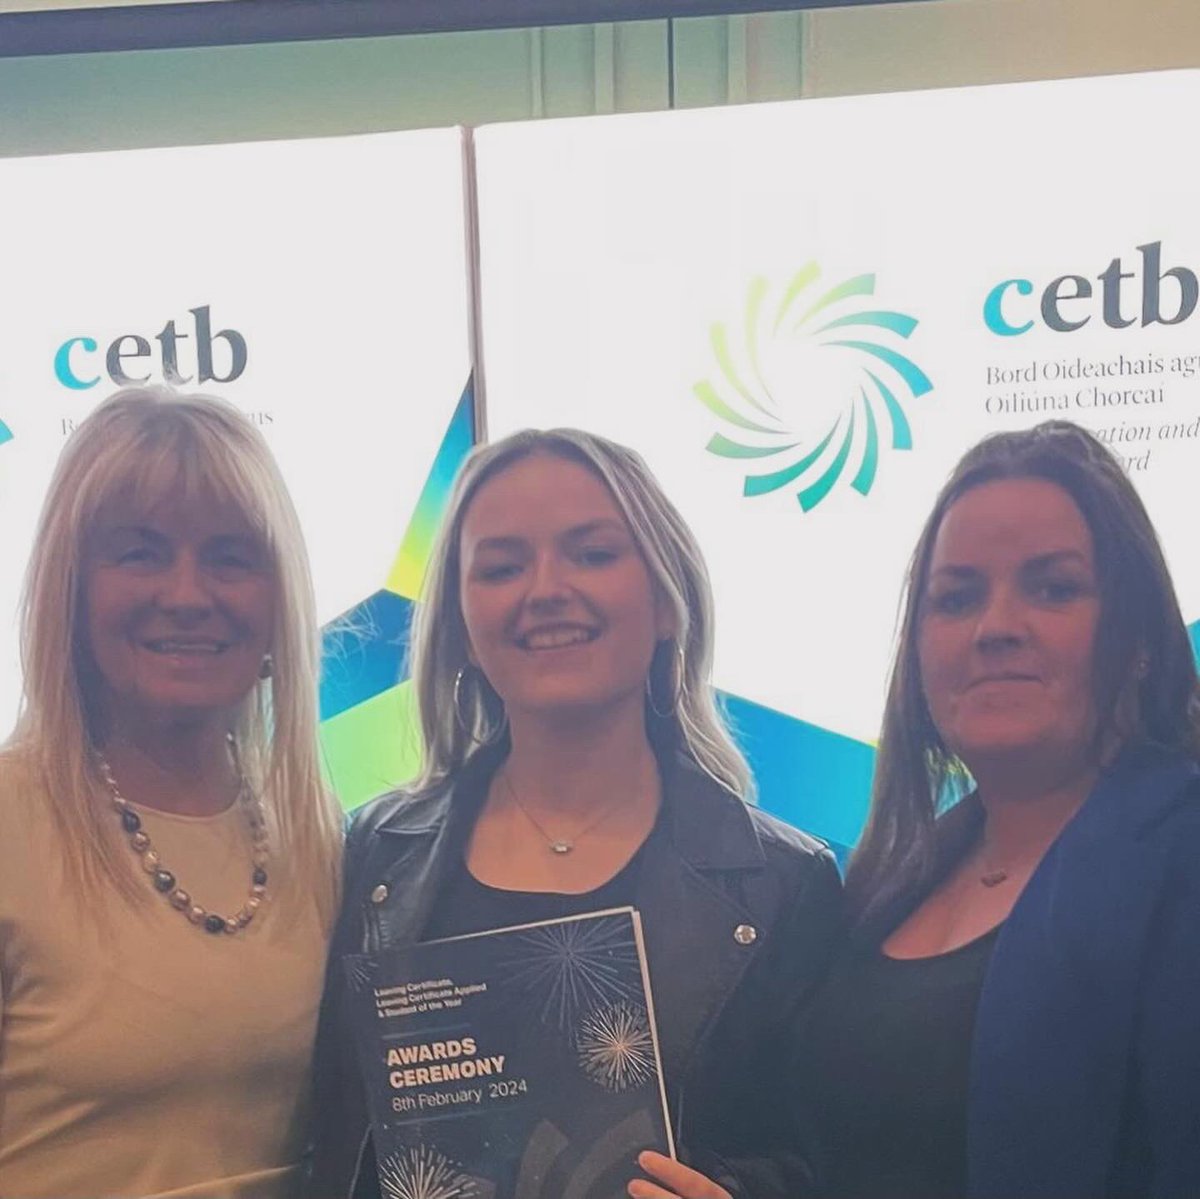 Cara Cullen receiving her Student of the Year Award at the CETB awards tonight. Cara is currently studying Musical Performance at MTU School of Music .